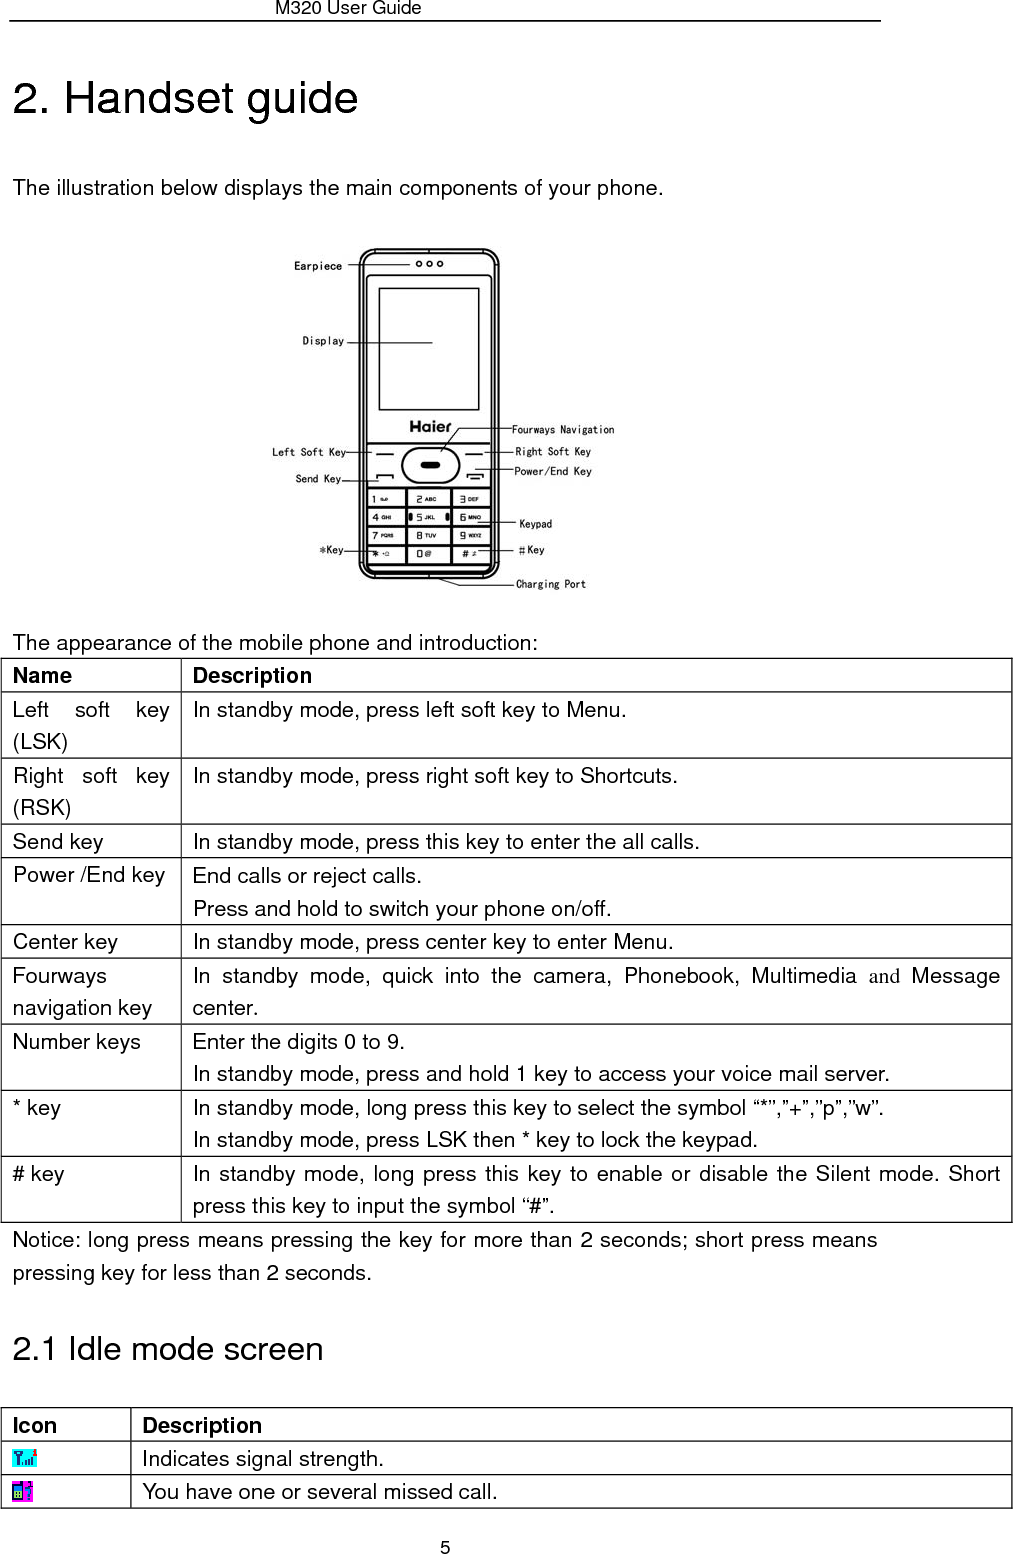                 M320 User Guide 5 2. Handset guide The illustration below displays the main components of your phone.  The appearance of the mobile phone and introduction: Name   Description  Left soft key (LSK) In standby mode, press left soft key to Menu. Right soft key (RSK) In standby mode, press right soft key to Shortcuts. Send key  In standby mode, press this key to enter the all calls. Power /End key  End calls or reject calls. Press and hold to switch your phone on/off. Center key  In standby mode, press center key to enter Menu. Fourways navigation key In standby mode, quick into the camera, Phonebook, Multimedia and Message center. Number keys  Enter the digits 0 to 9. In standby mode, press and hold 1 key to access your voice mail server. * key  In standby mode, long press this key to select the symbol “*”,”+”,”p”,”w”. In standby mode, press LSK then * key to lock the keypad. # key  In standby mode, long press this key to enable or disable the Silent mode. Short press this key to input the symbol “#”. Notice: long press means pressing the key for more than 2 seconds; short press means pressing key for less than 2 seconds. 2.1 Idle mode screen Icon   Description   Indicates signal strength.  You have one or several missed call. 